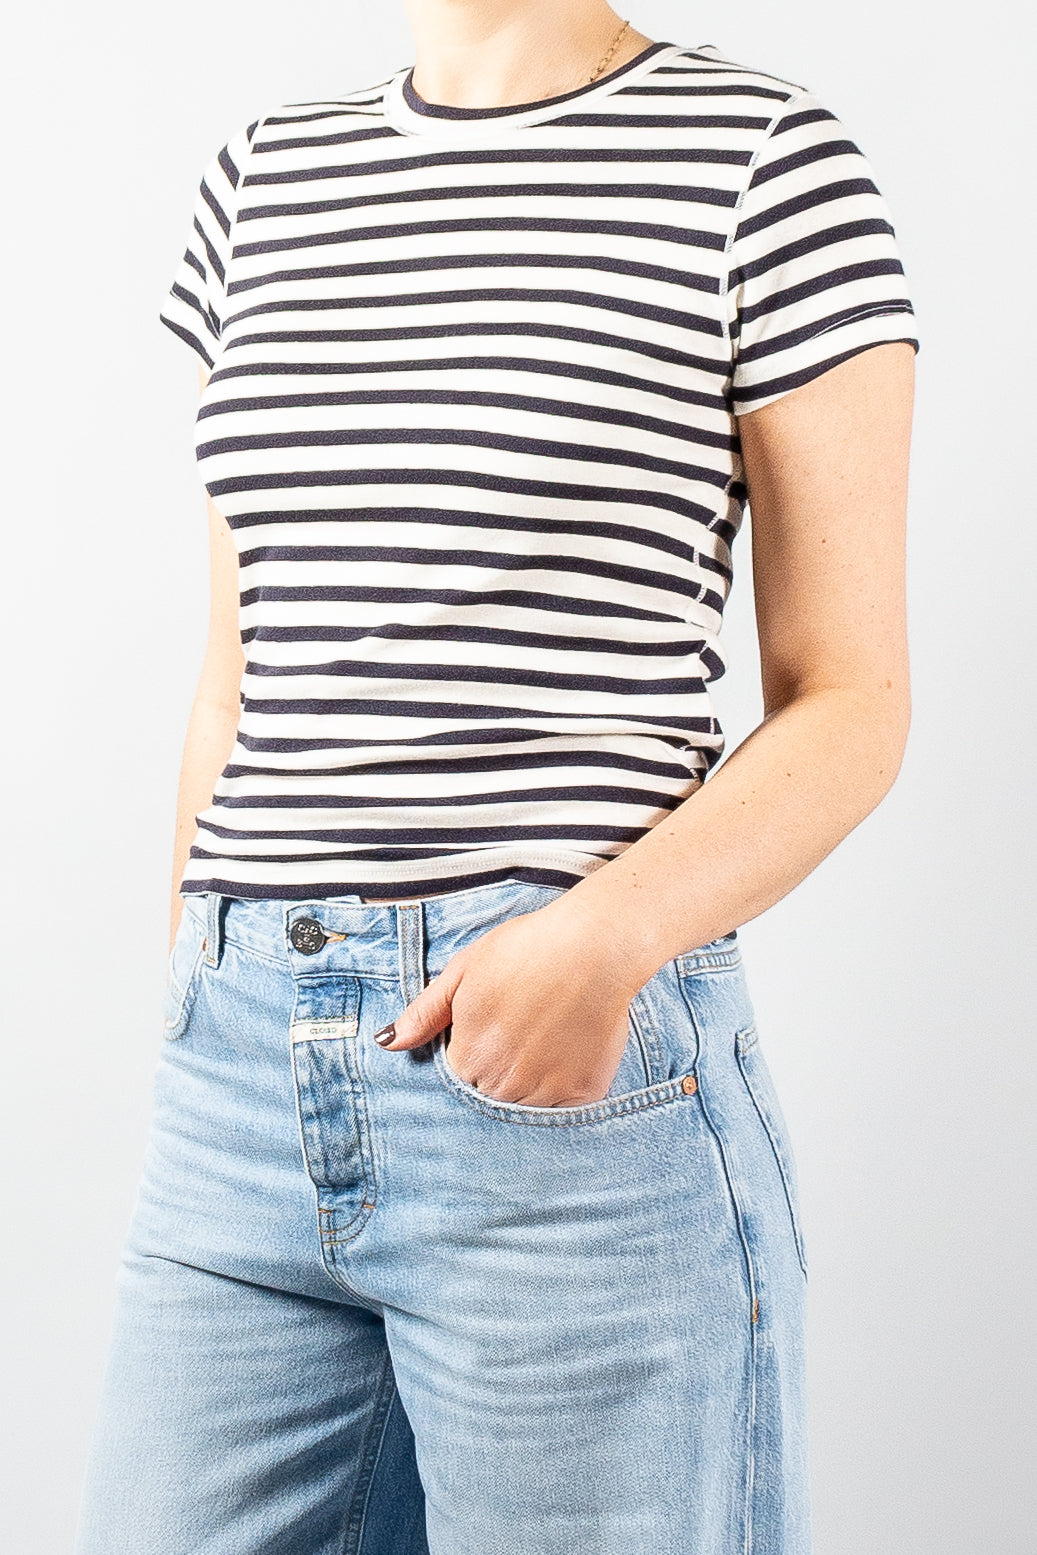 Closed Cropped Striped T-Shirt-Tops-Misch-Boutique-Vancouver-Canada-misch.ca